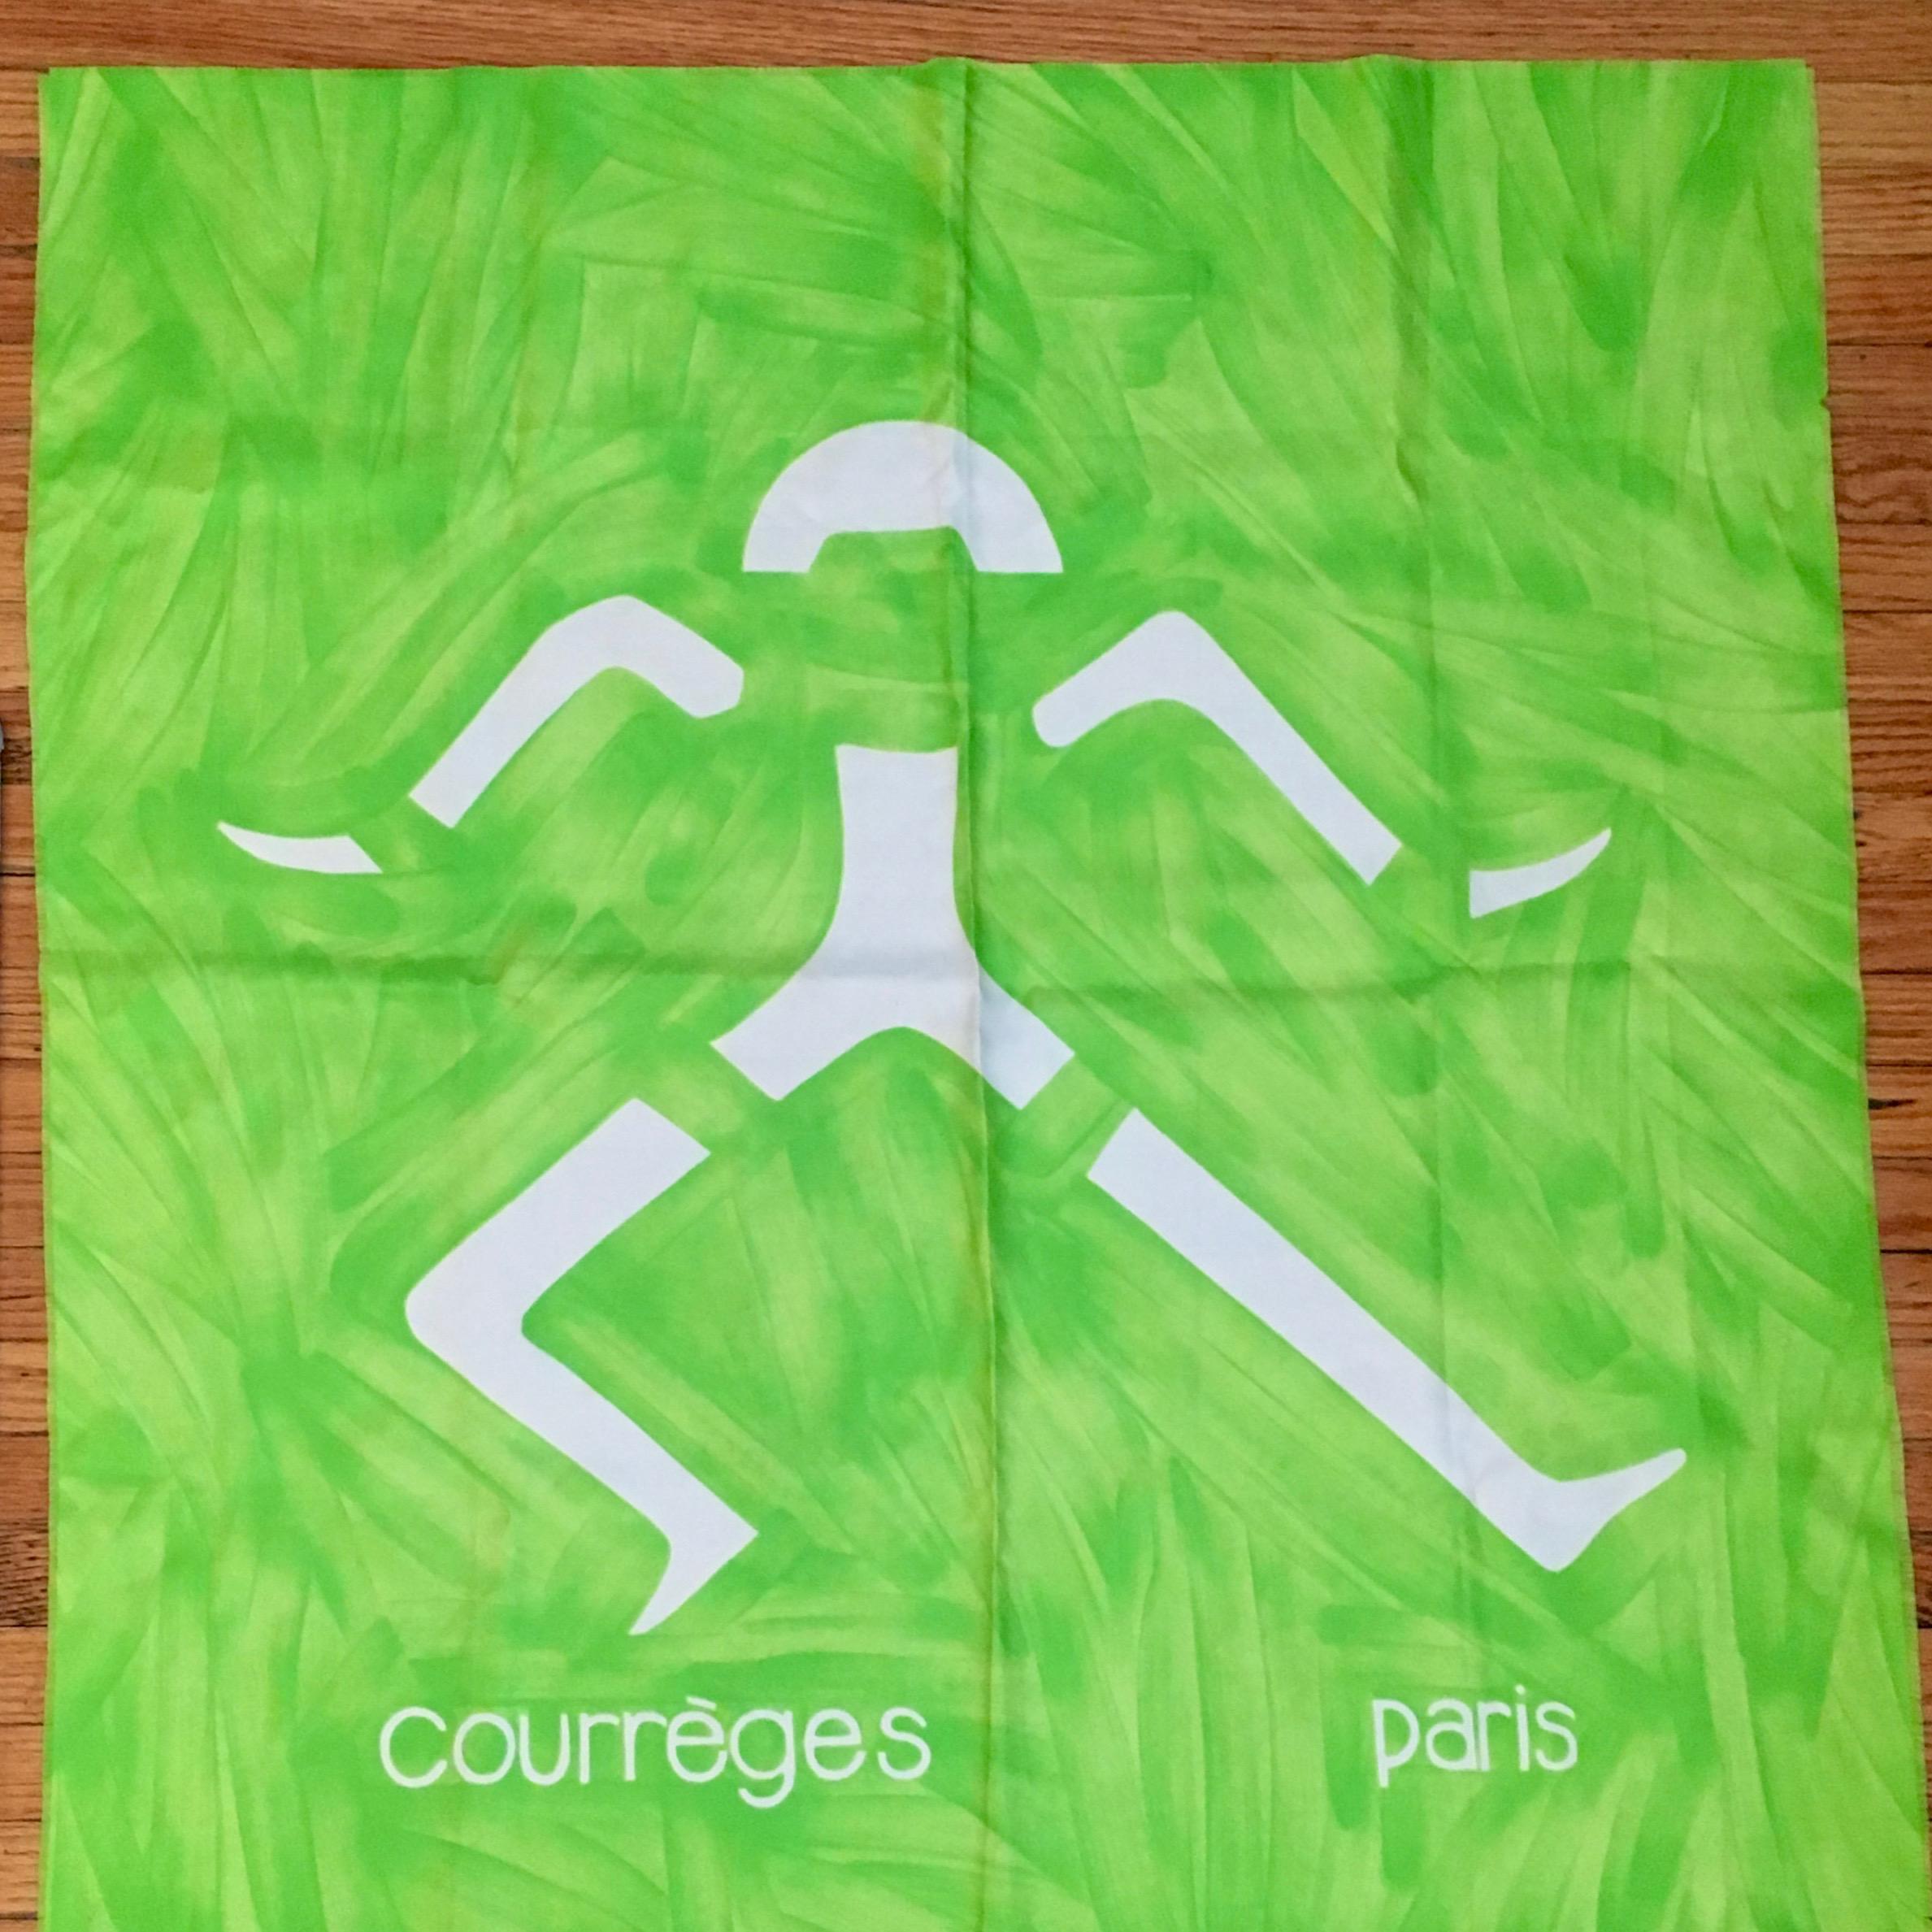 This is an amazing neon green Courreges scarf from the 1960s. The green background features what looks like brush strokes. The design features an abstract dancing man in the center with 'Courreges Paris' written under it. There is no content tag on